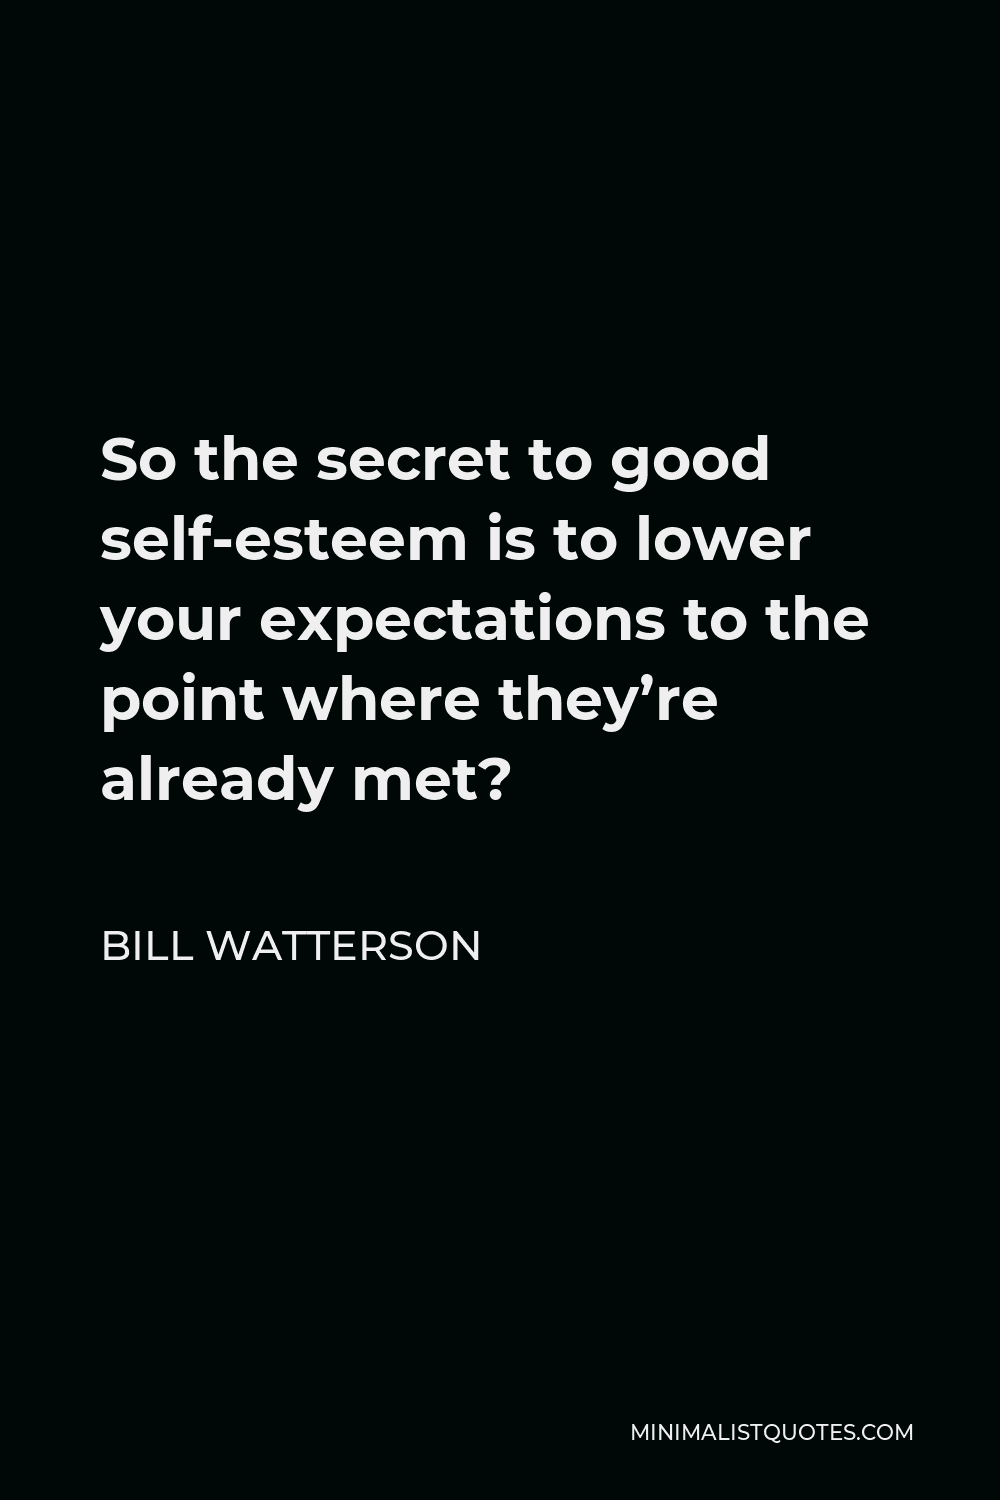 Bill Watterson Quote - So the secret to good self-esteem is to lower your expectations to the point where they’re already met?